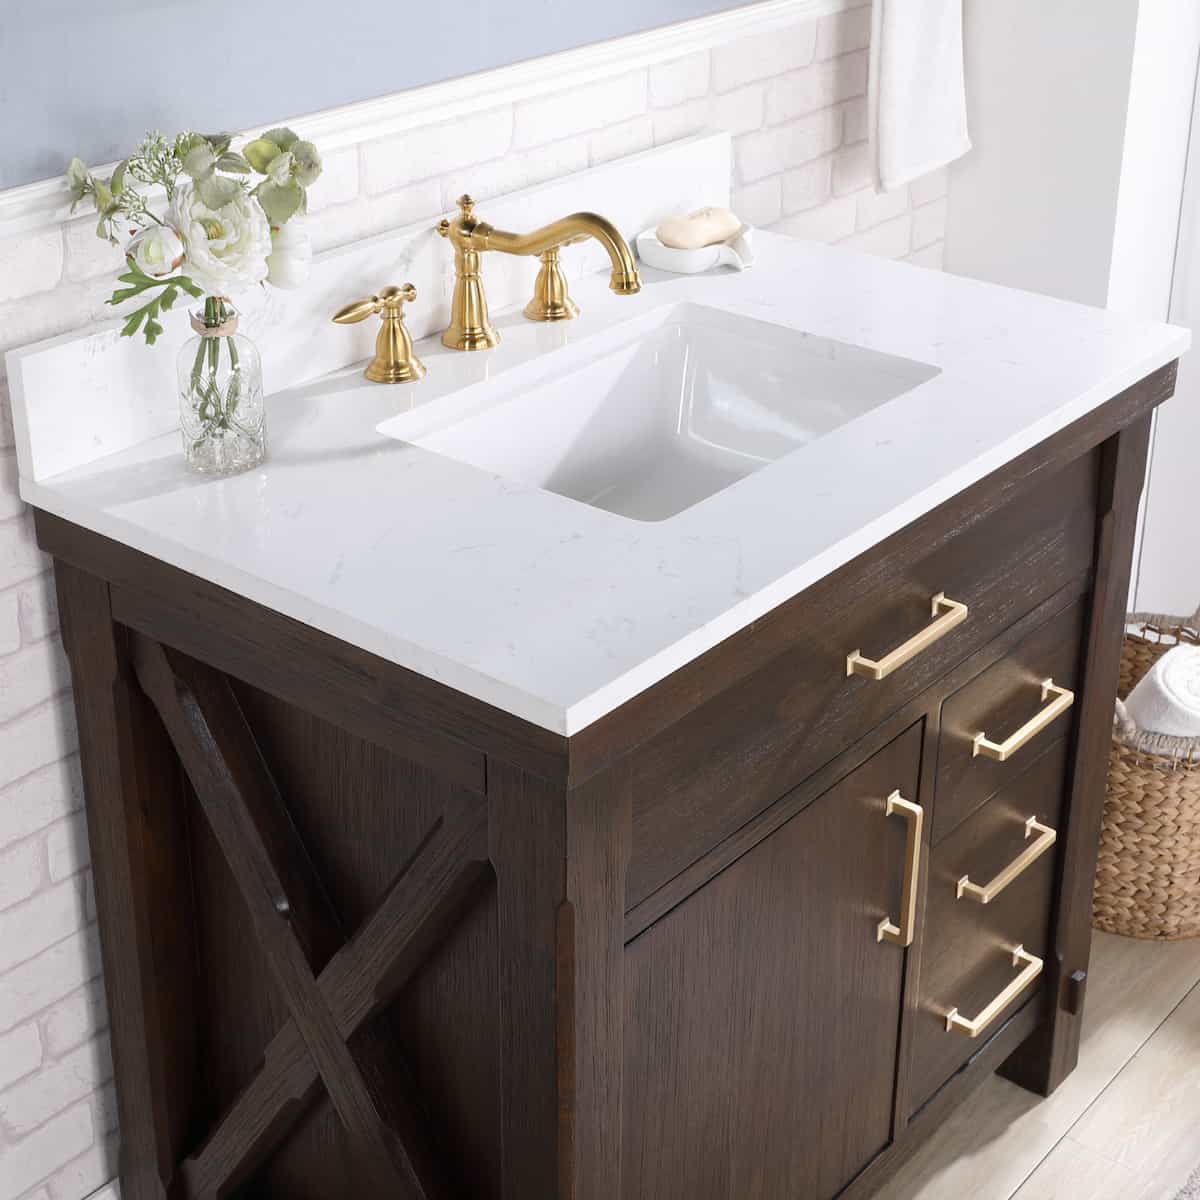 Vinnova Viella 36 Inch Freestanding Single Sink Bath Vanity in Deep Walnut Finish with White Composite Countertop With Mirror Counter 701836-DW-WS